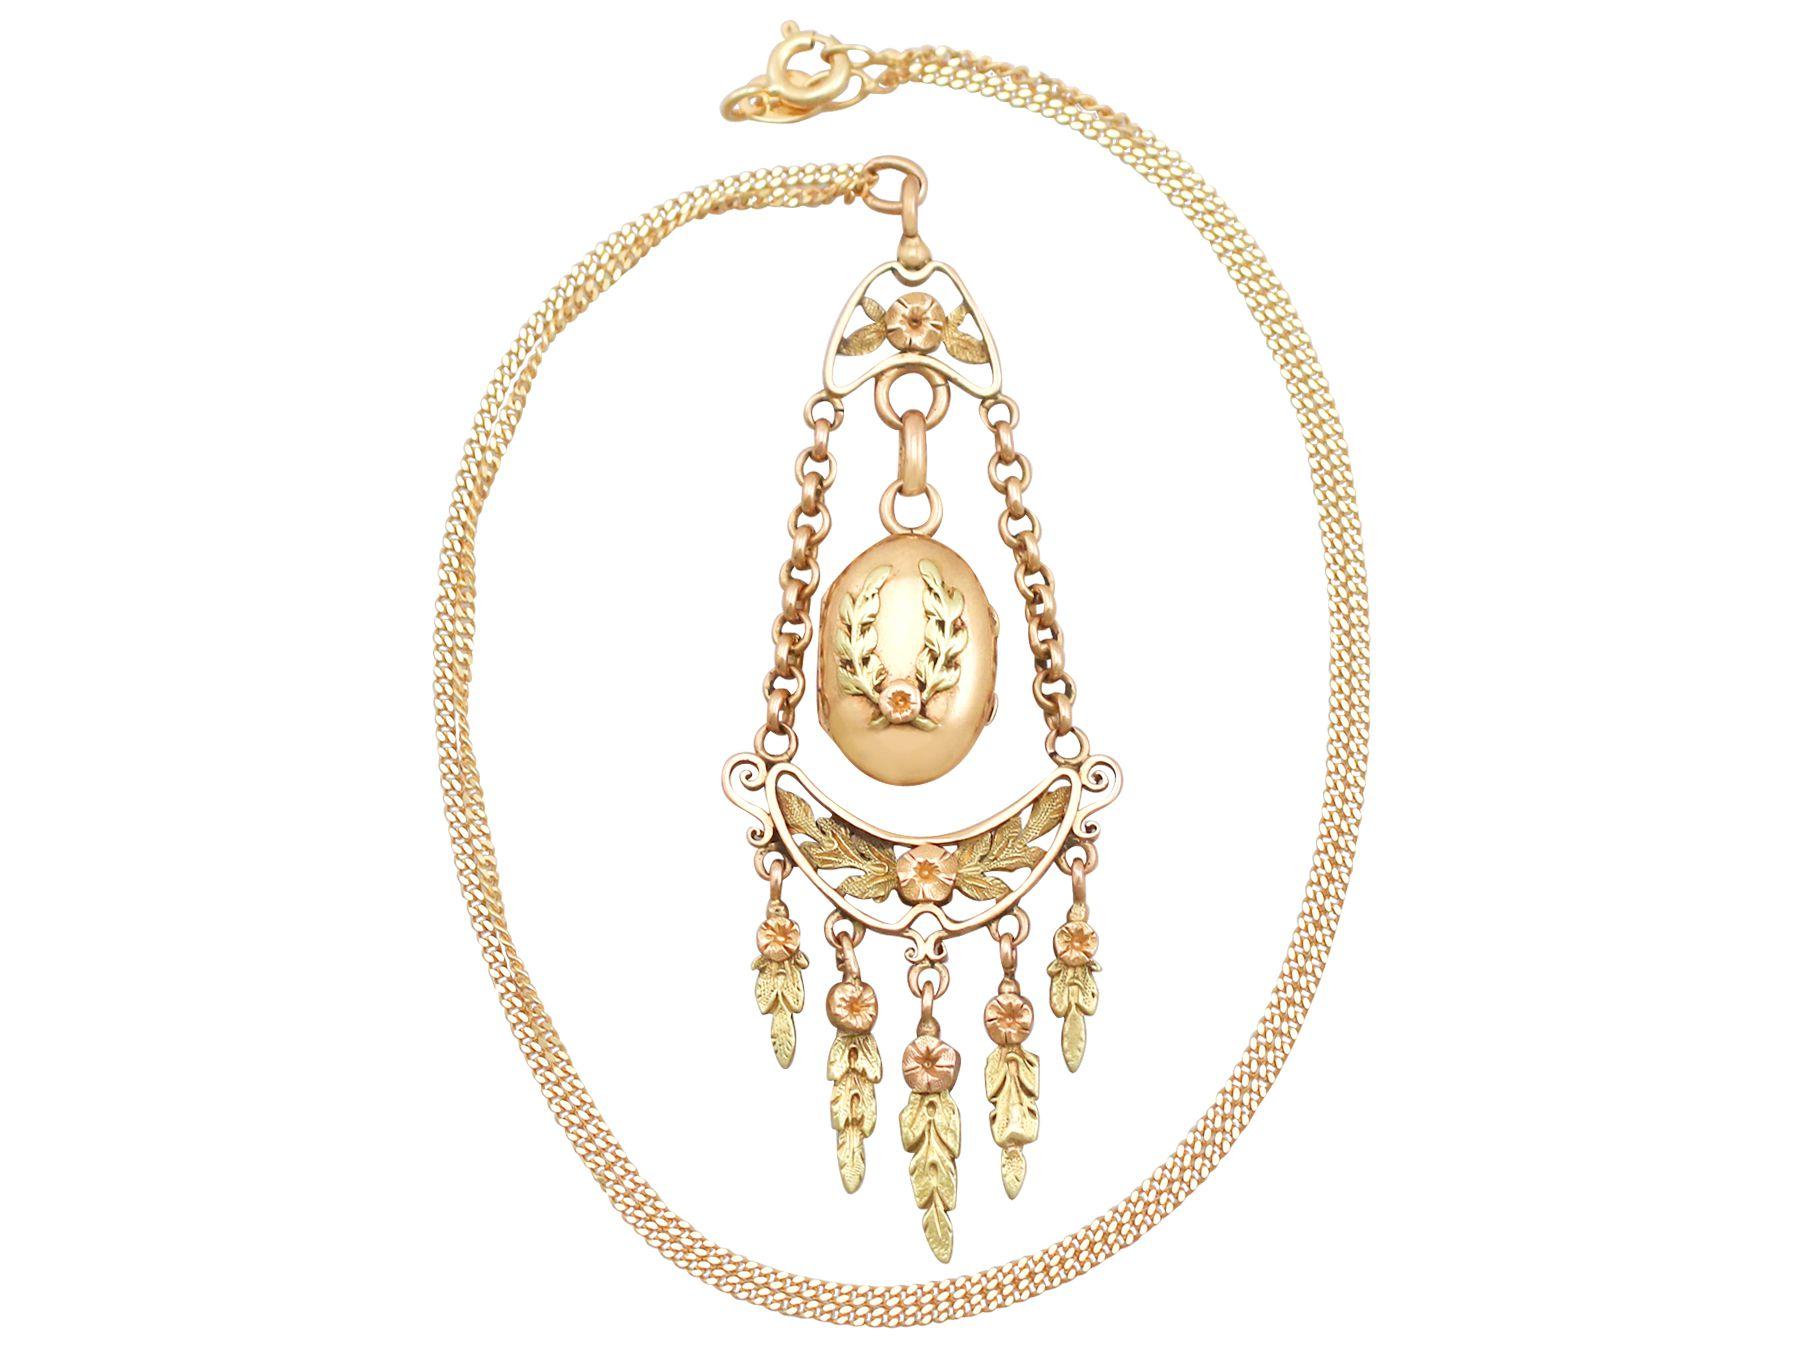 An exceptional antique French locket crafted in 18 karat yellow and rose gold; part of our diverse antique jewelry and estate jewelry collections.

This exceptional, fine and impressive antique gold locket has been crafted in 18k yellow and rose